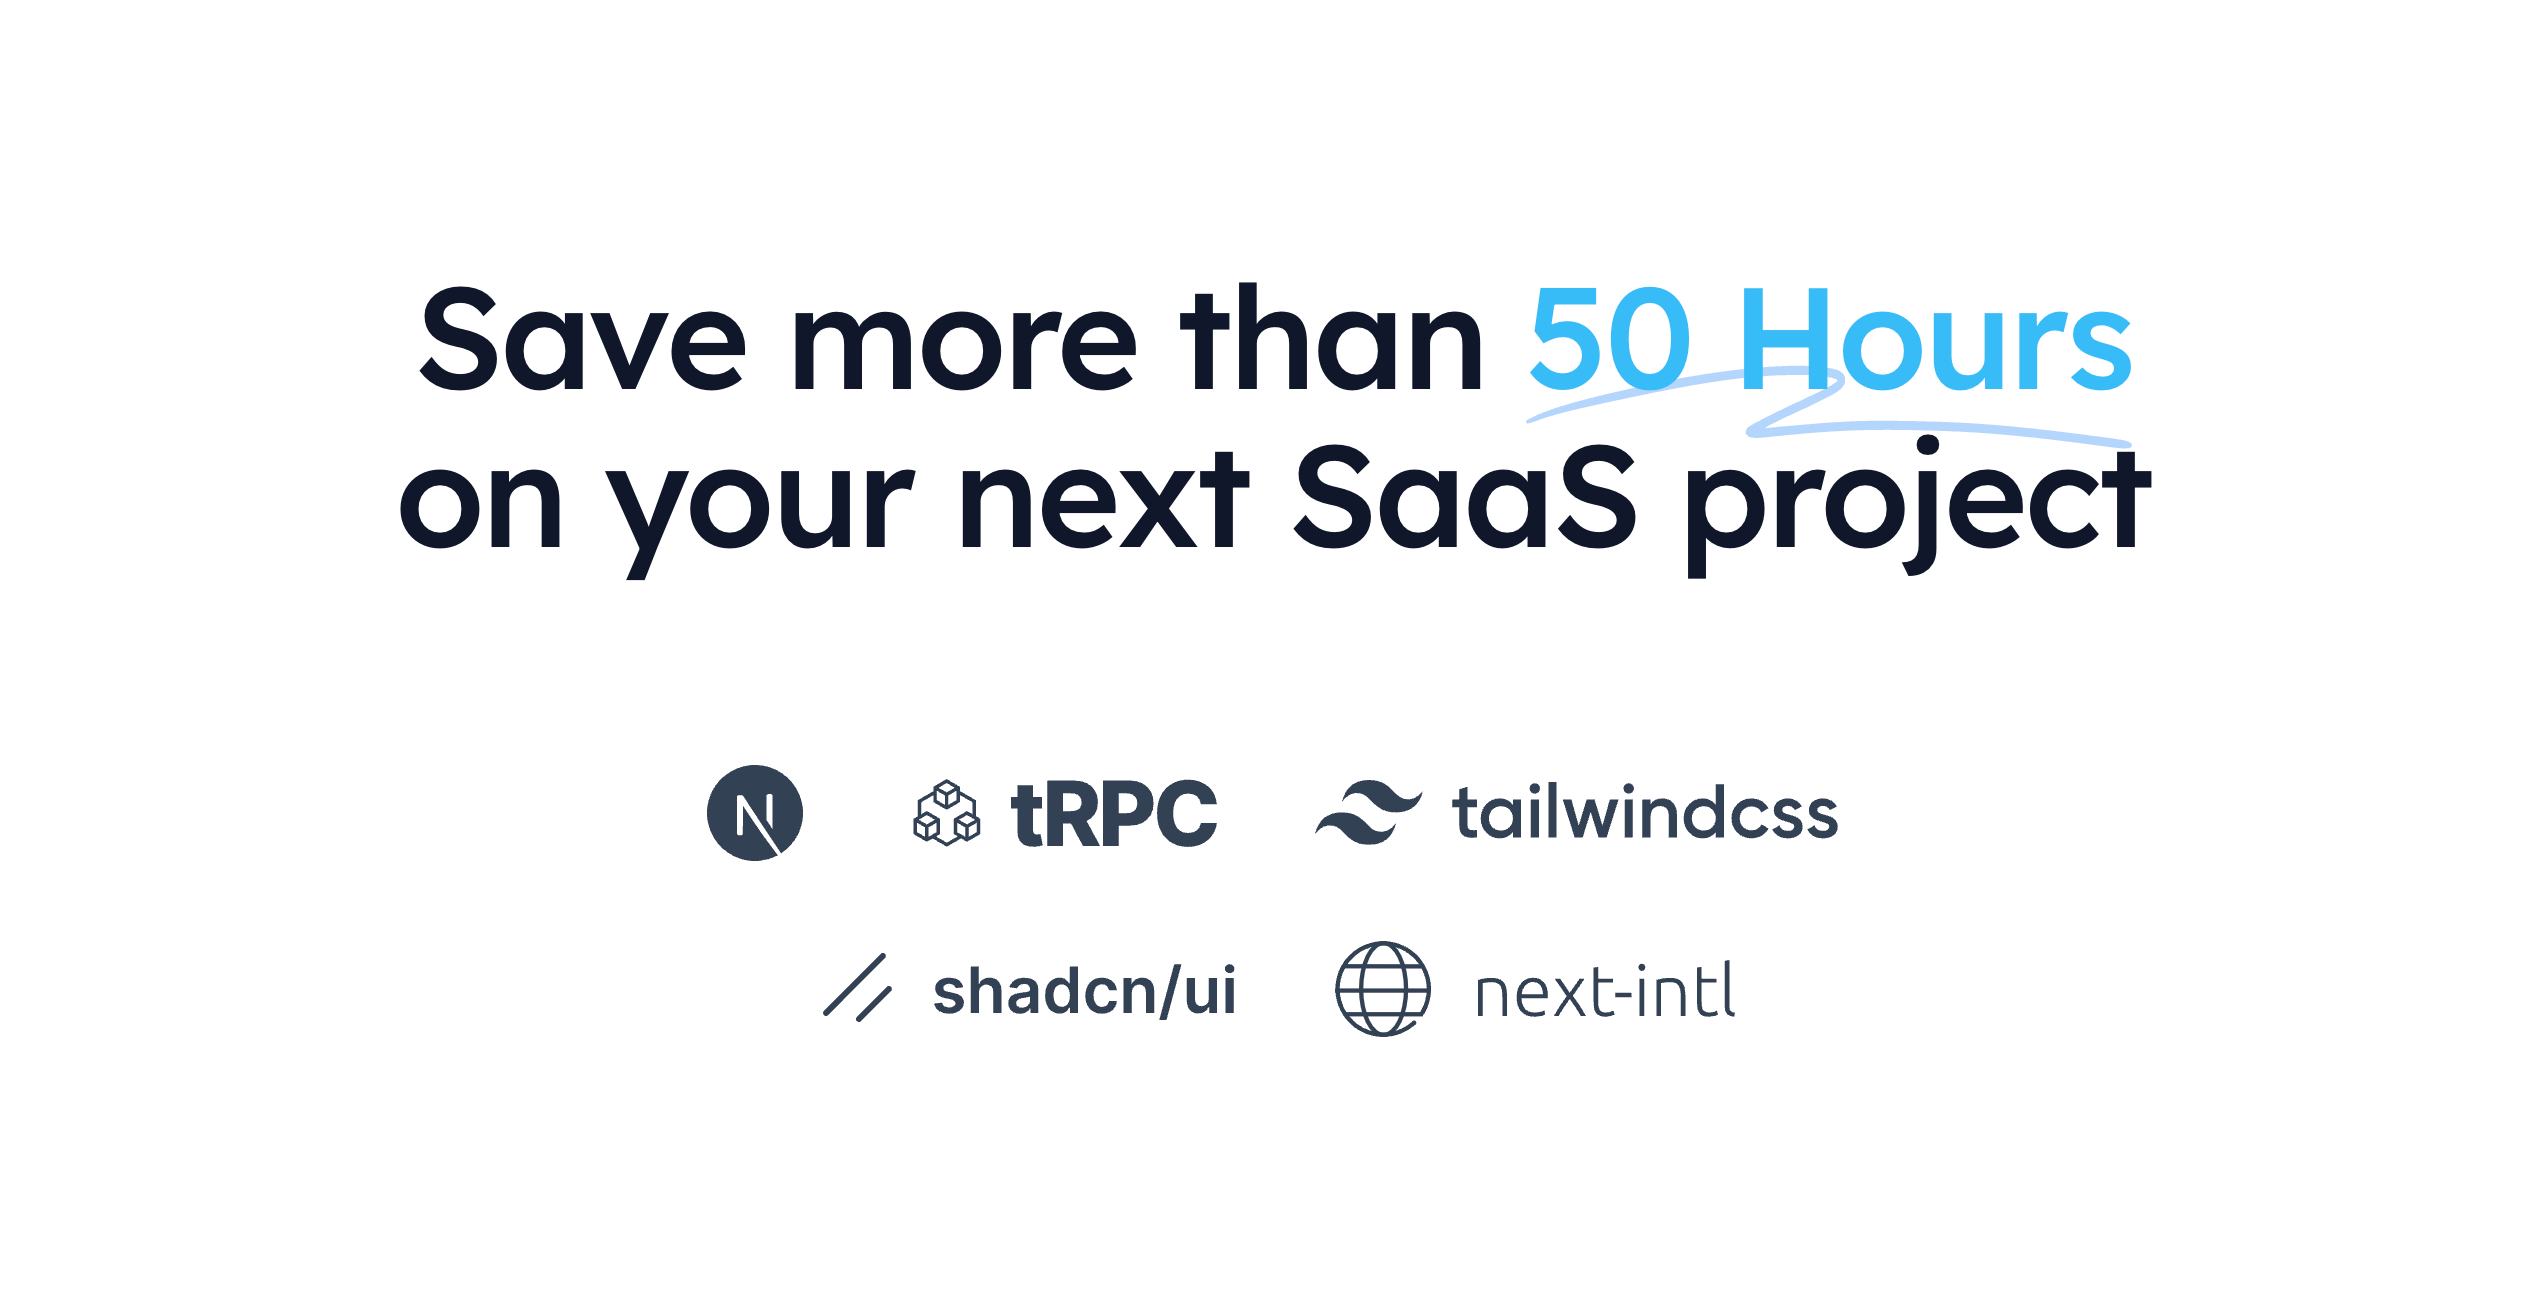 staarter-dev - Launch your next SaaS faster with staarter.dev